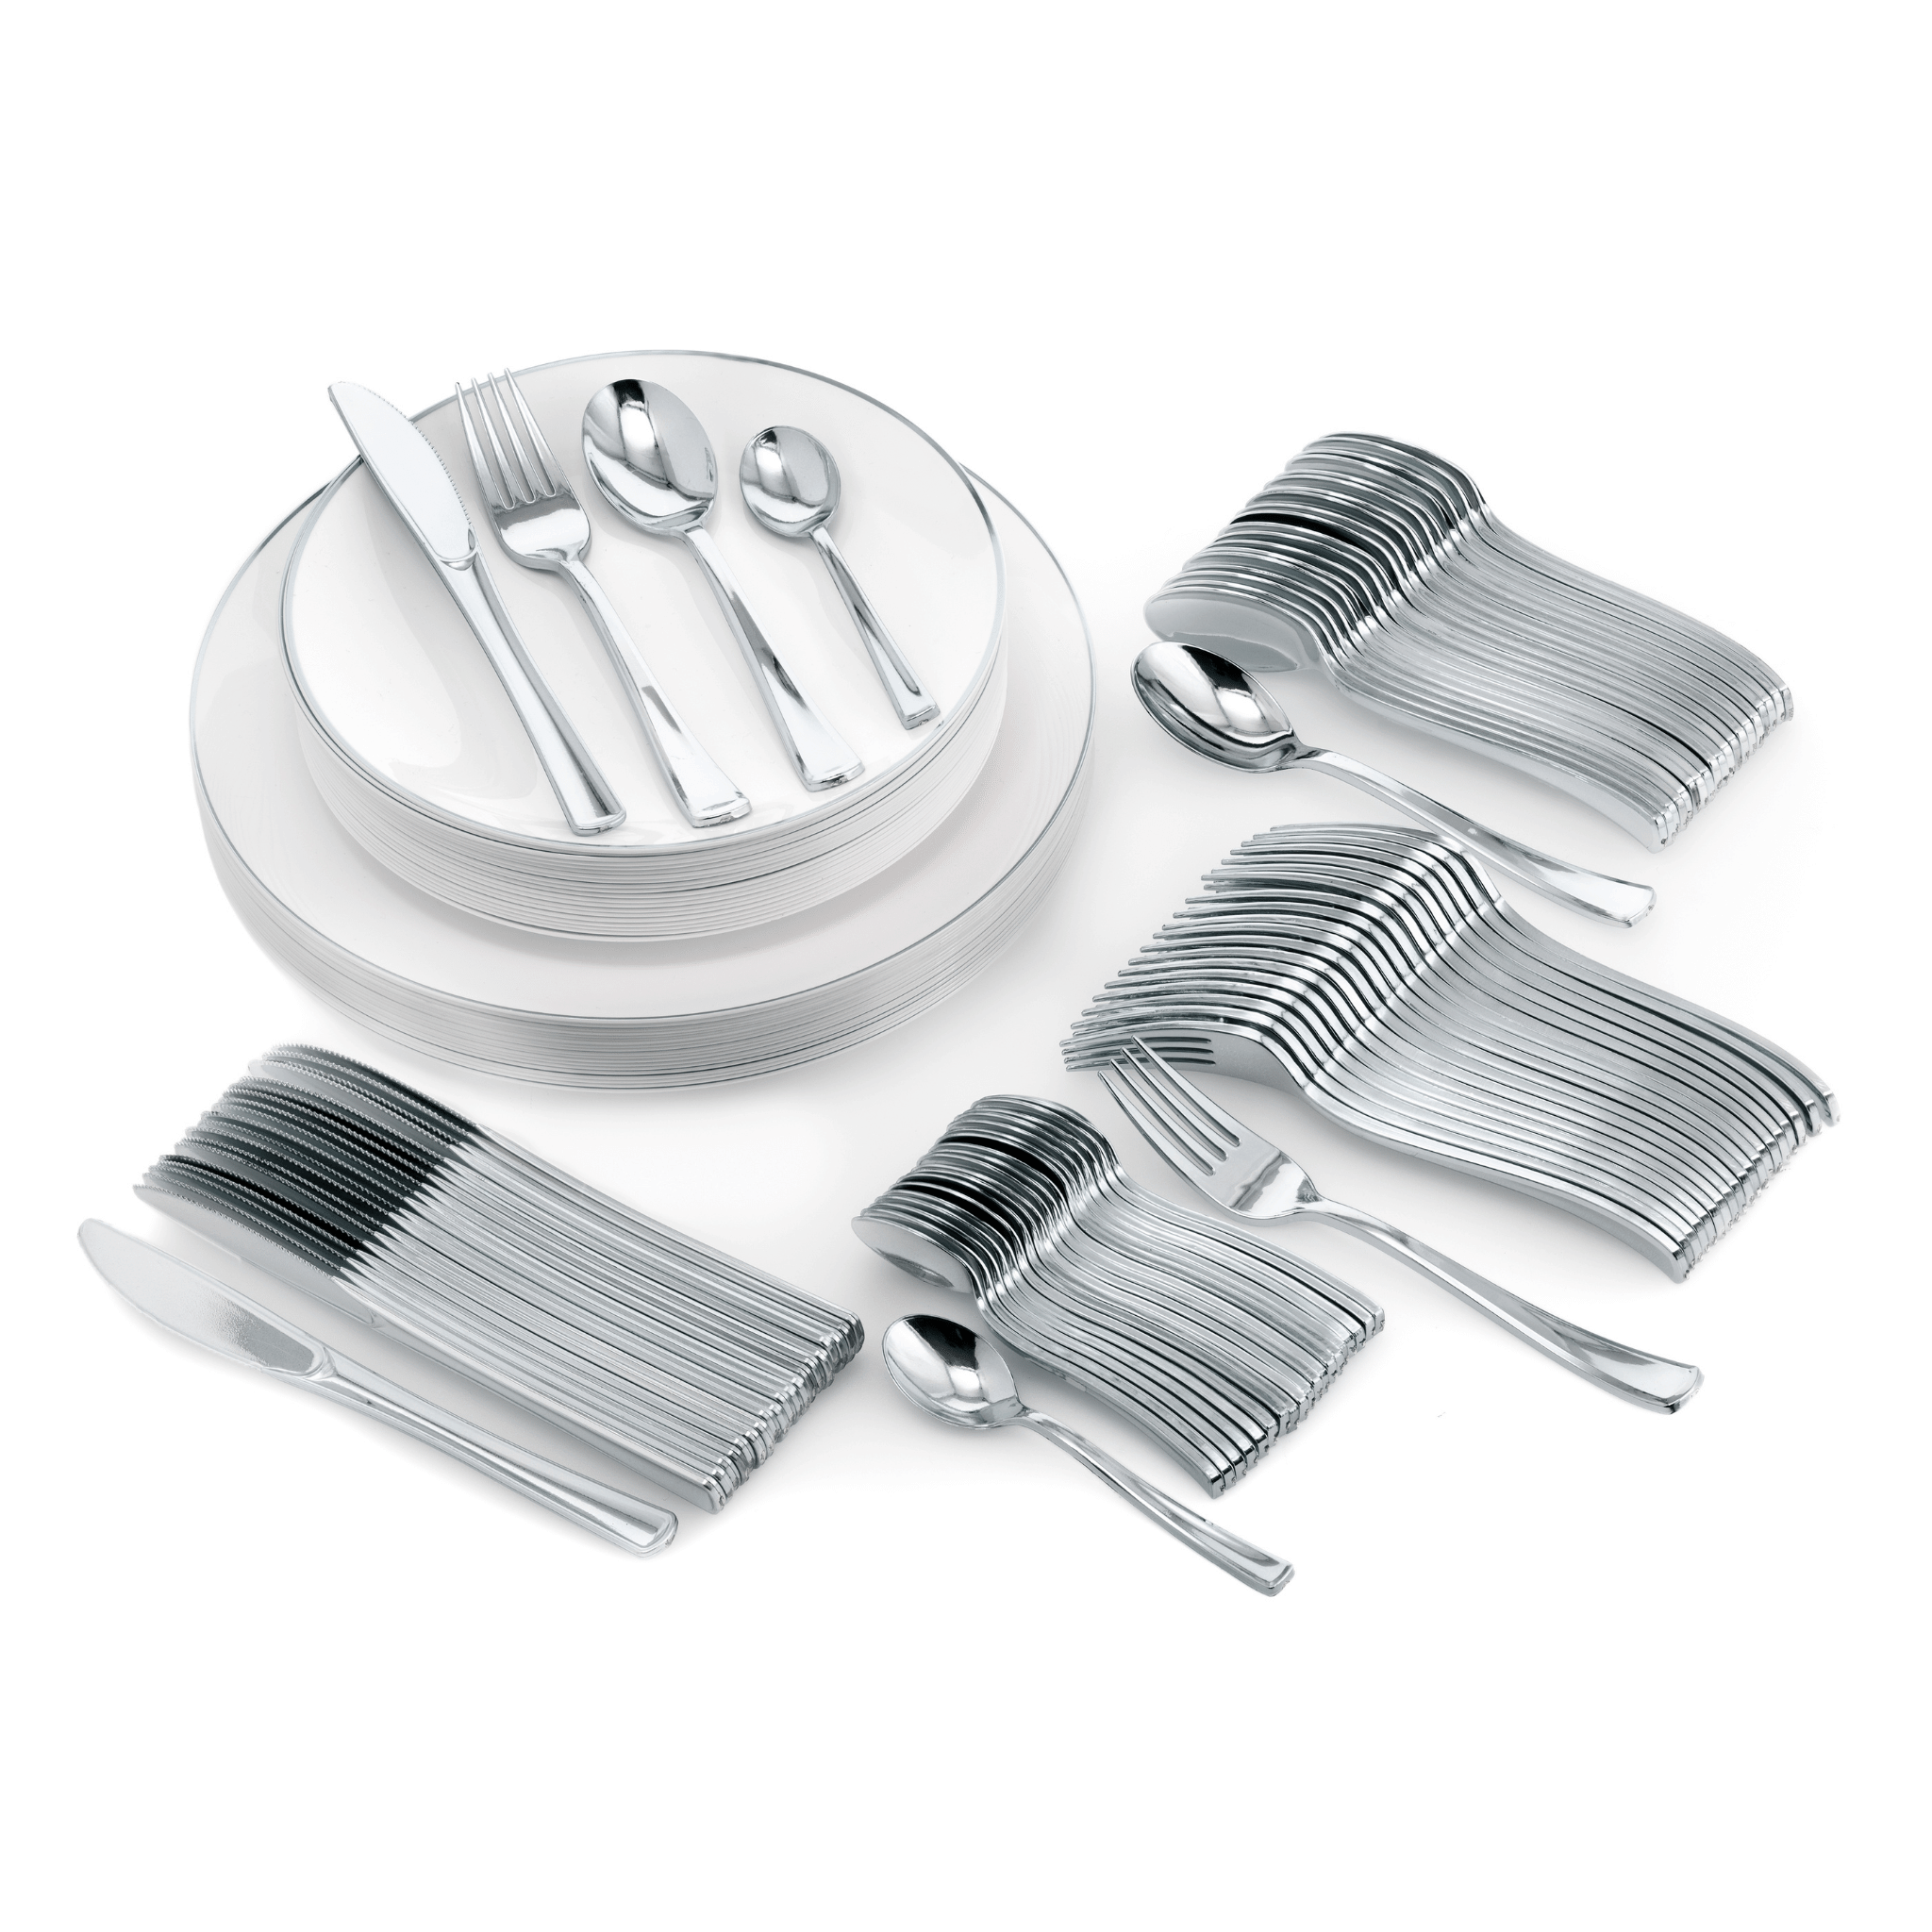 700 Piece Silver Classic Combo Set | Serves 100 Guests